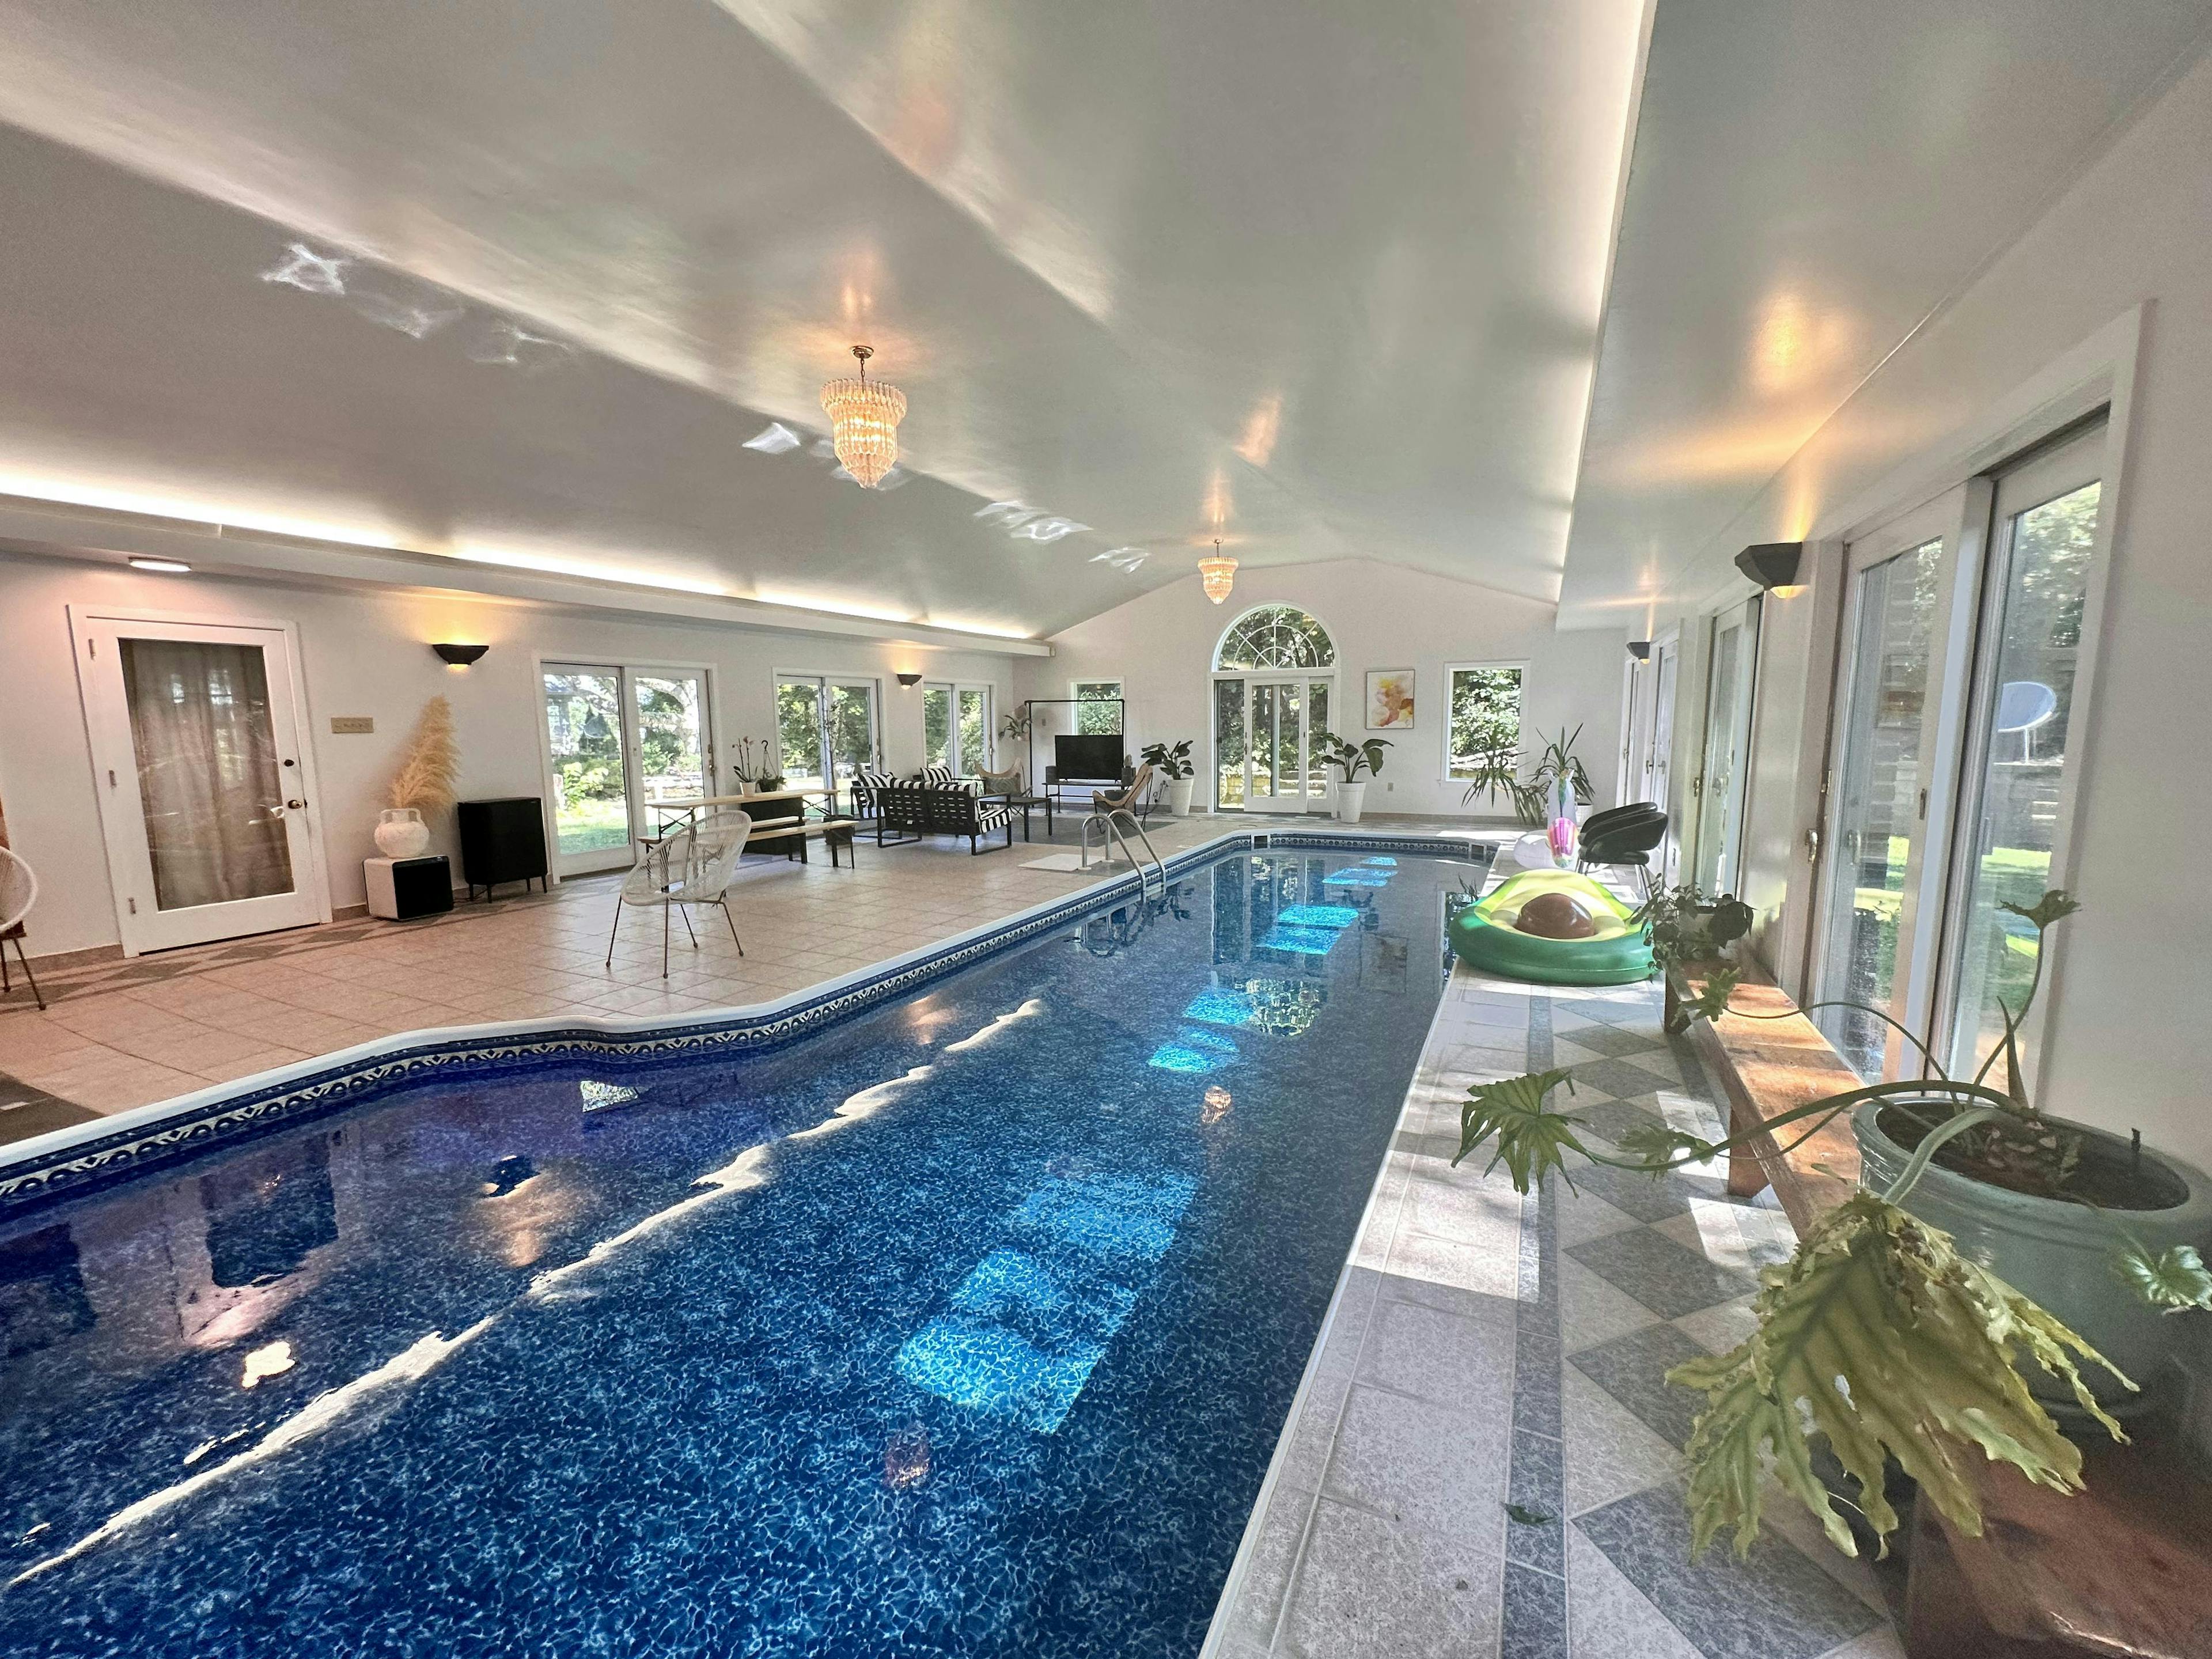 A Resort Style Indoor Saltwater Pool & HOT TUB!